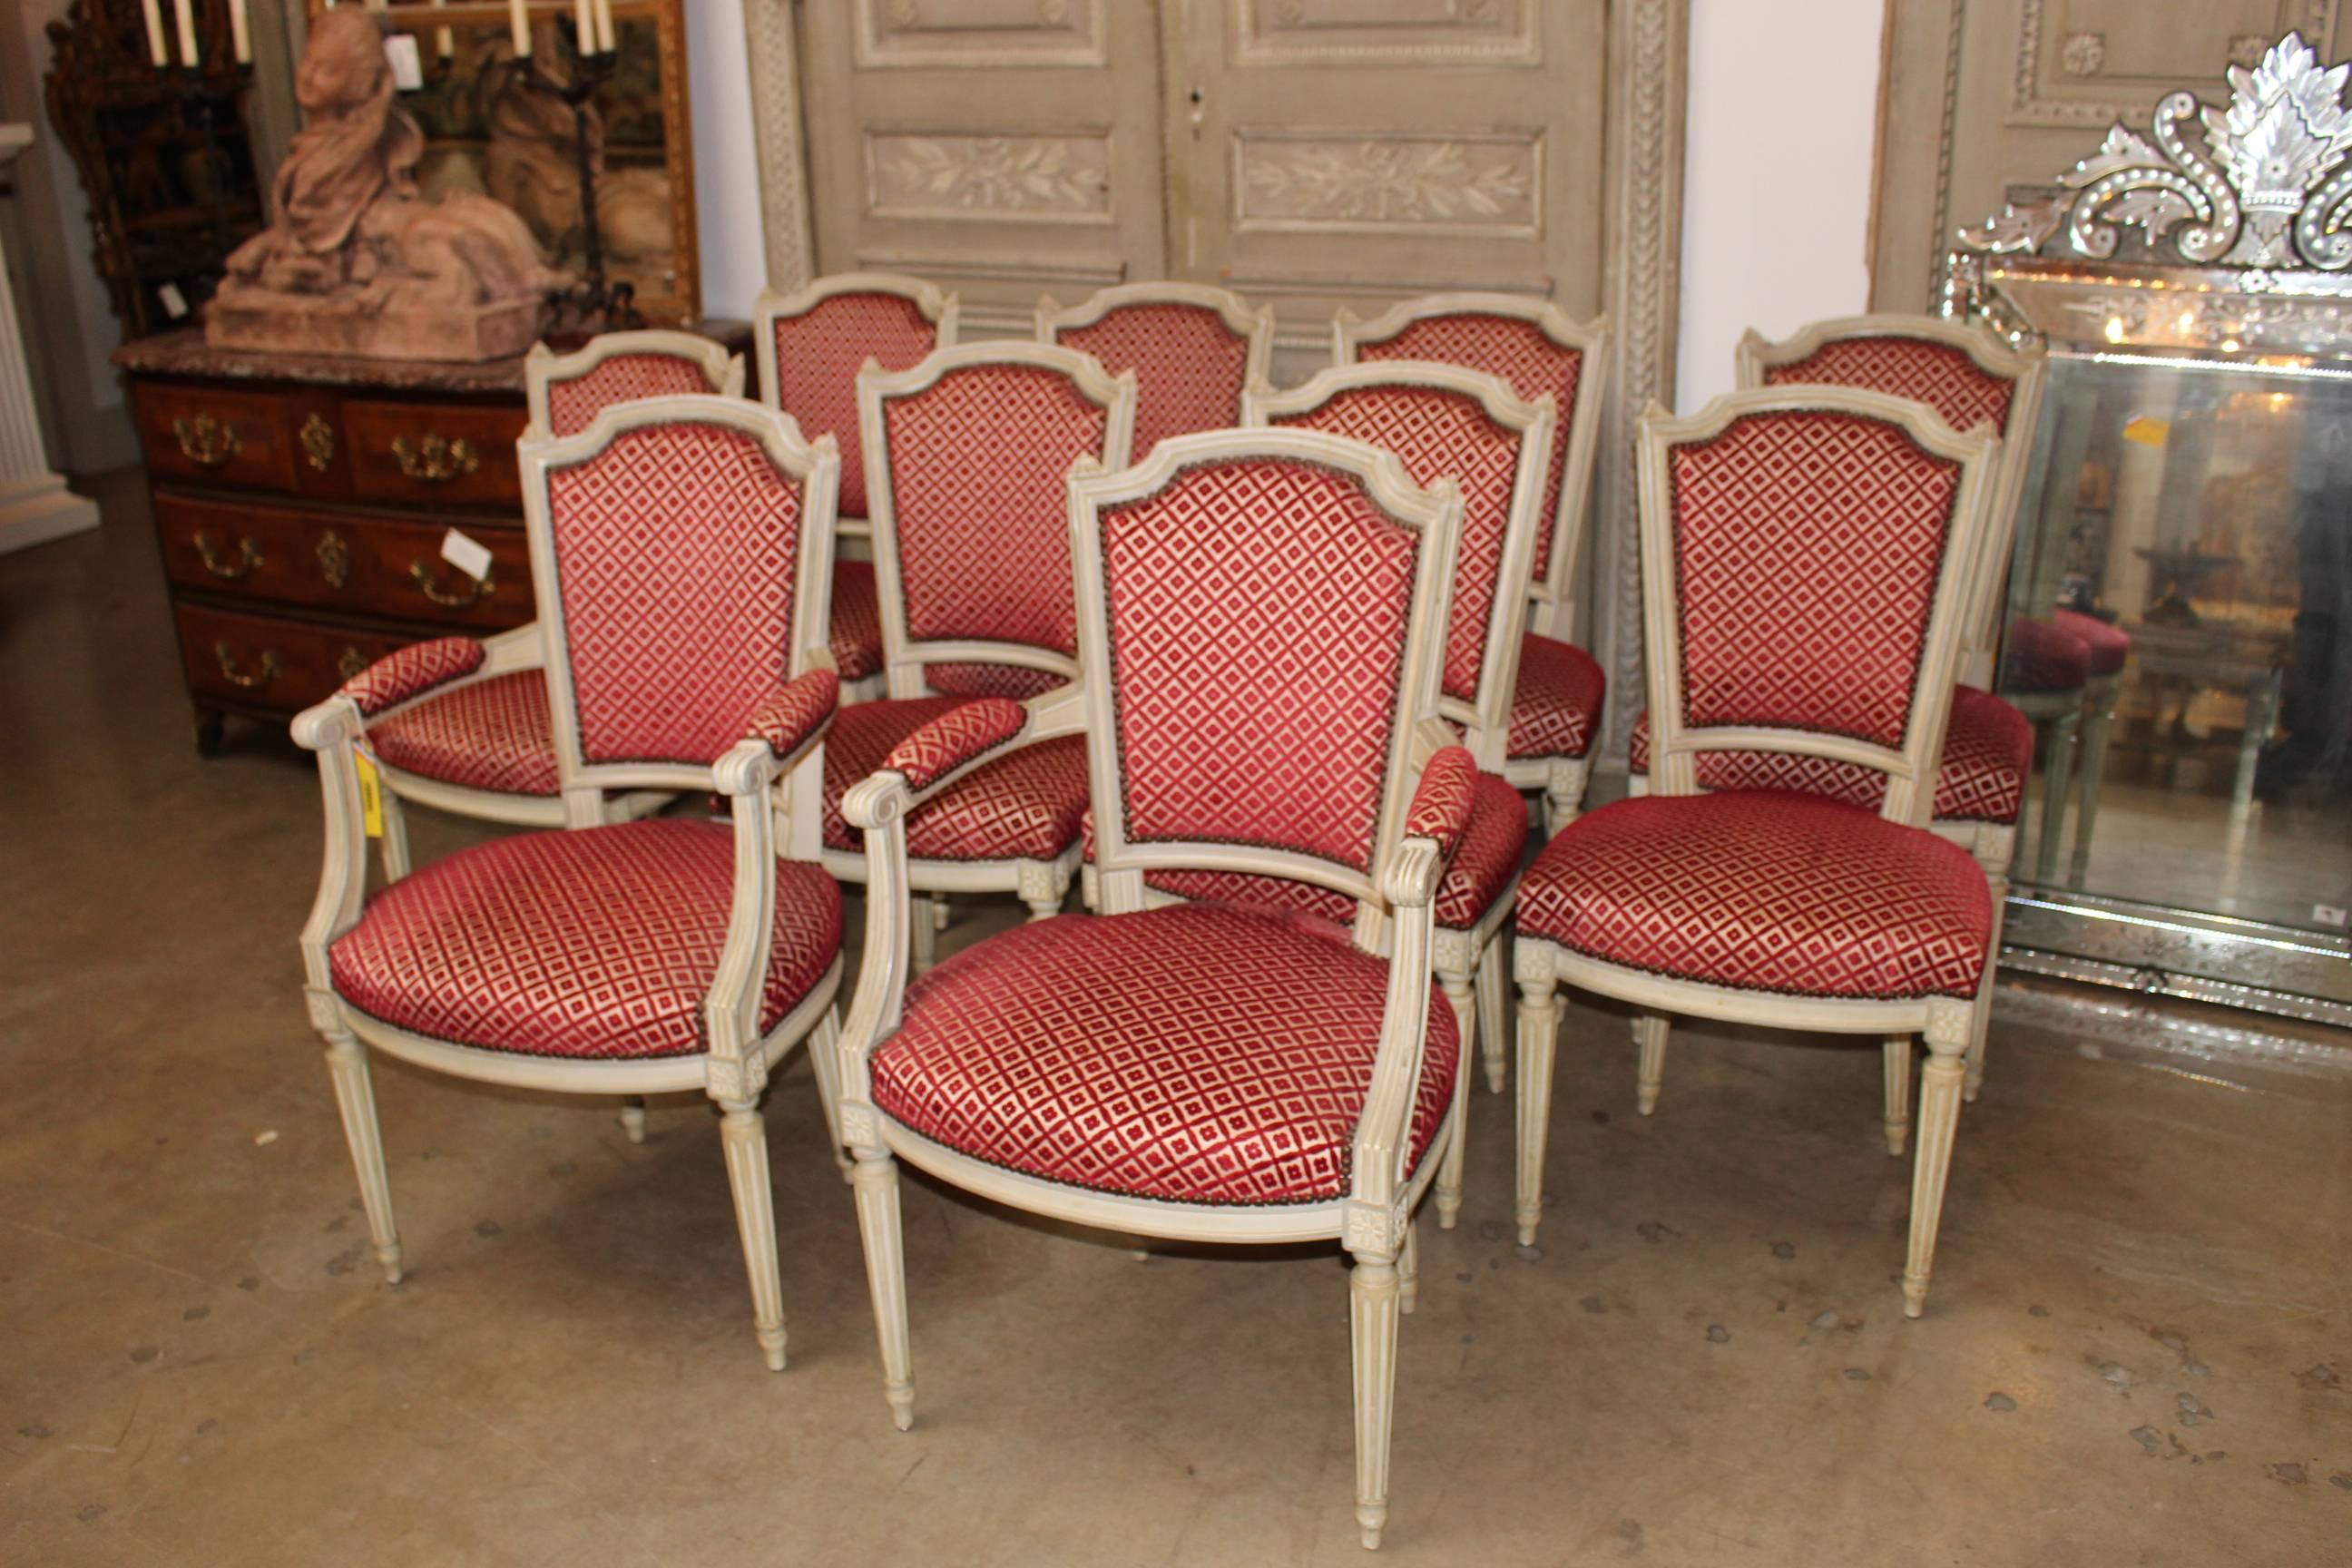 A set of ten French Louis XVI style dining chairs, eight side chairs and two armchairs, with a painted cream and gray finish.